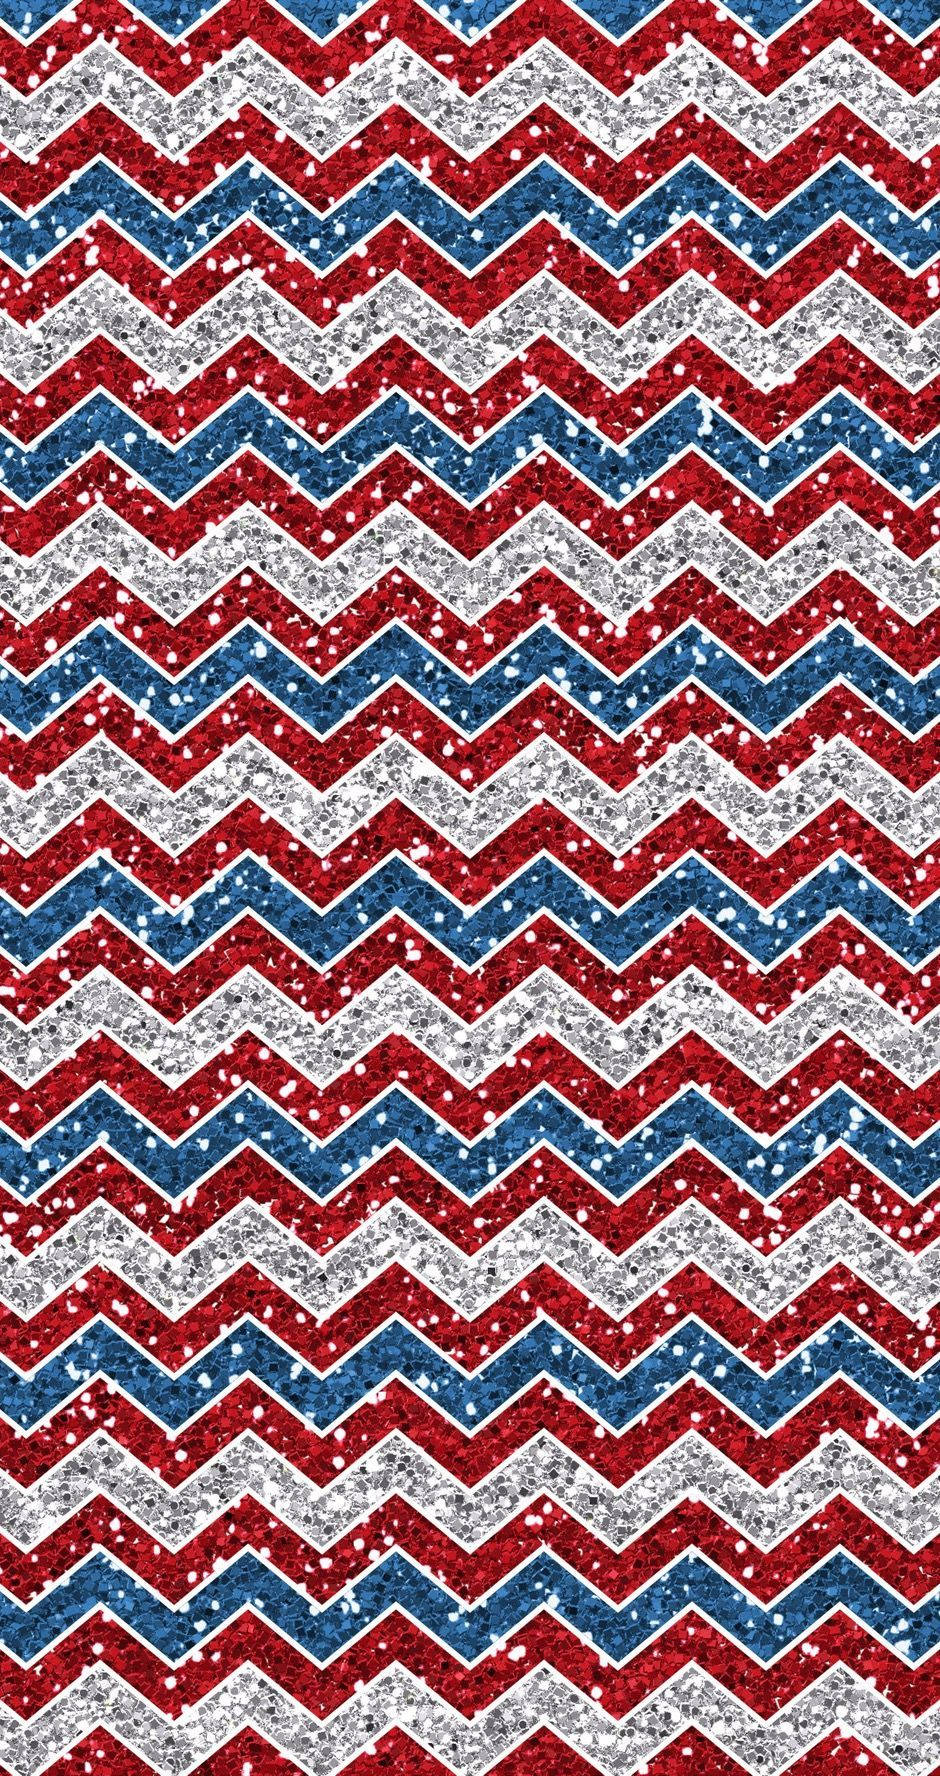 Celebrate 4th Of July in style. Wallpaper